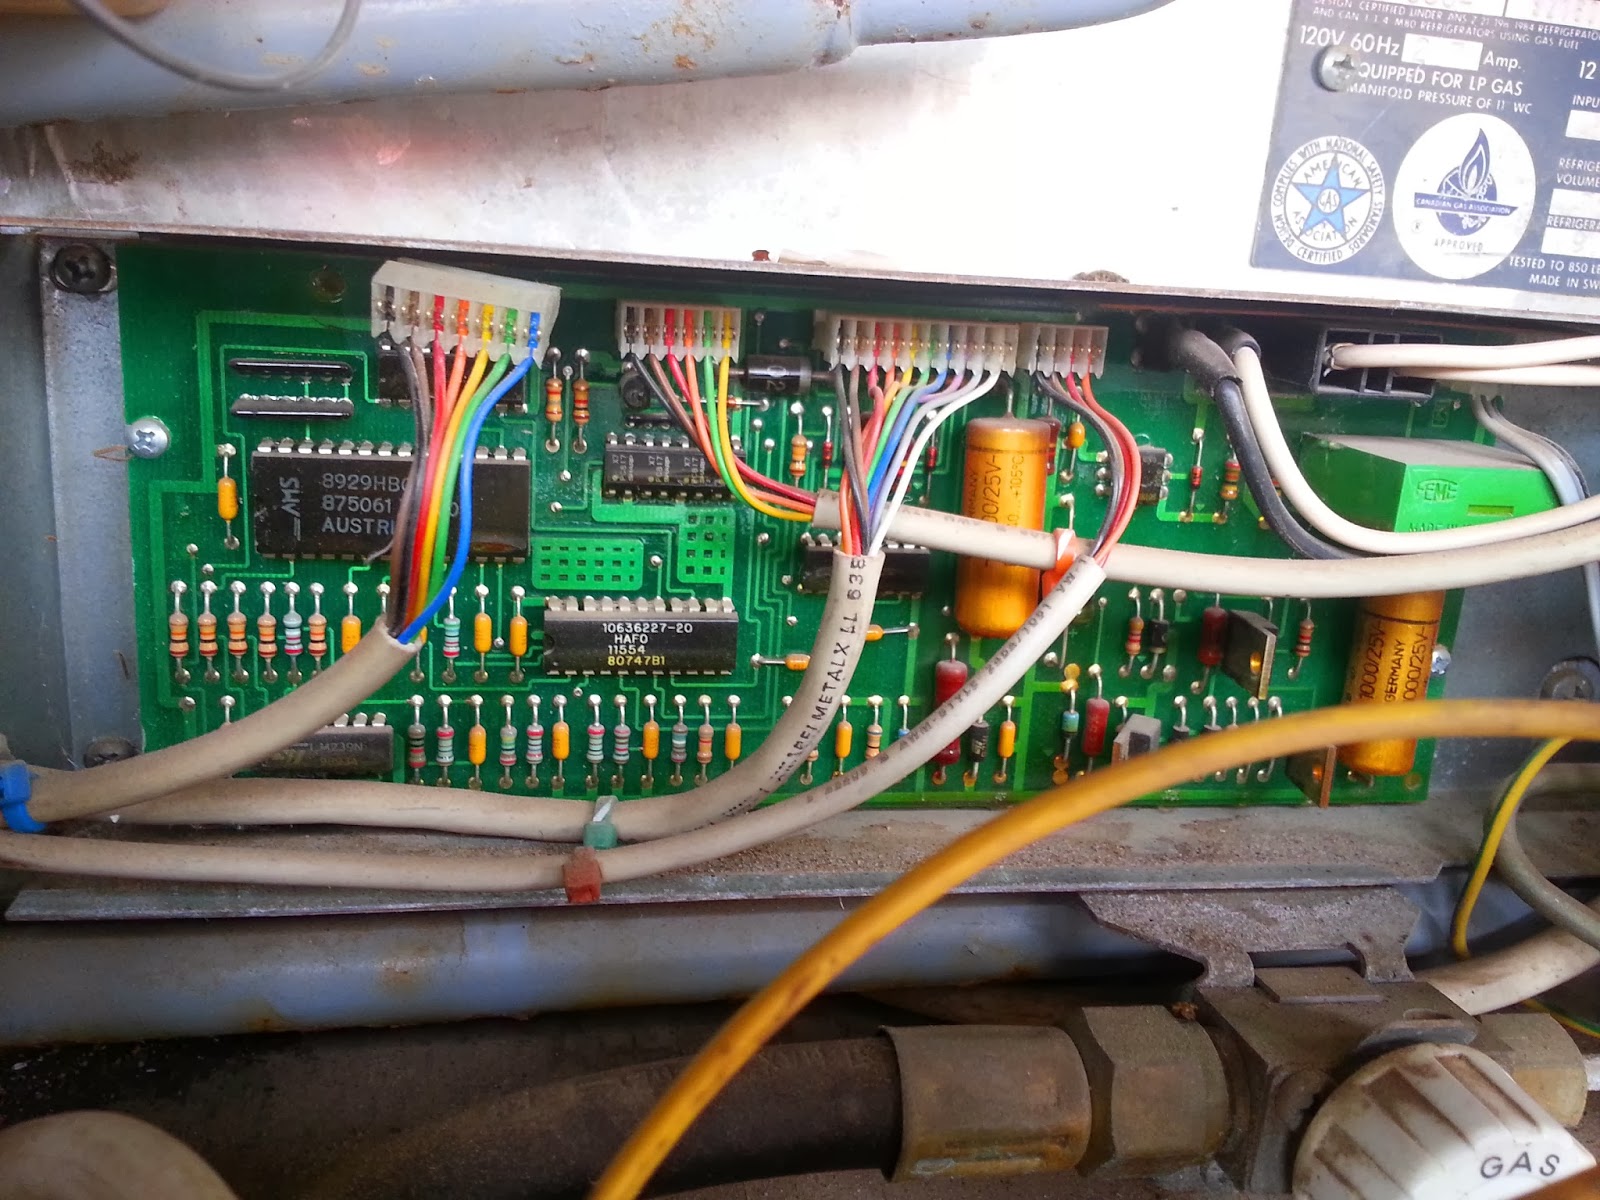 Americruiser: Dometic RM 3804 repair revisited Dometic Rv Furnace Red Light Flashing